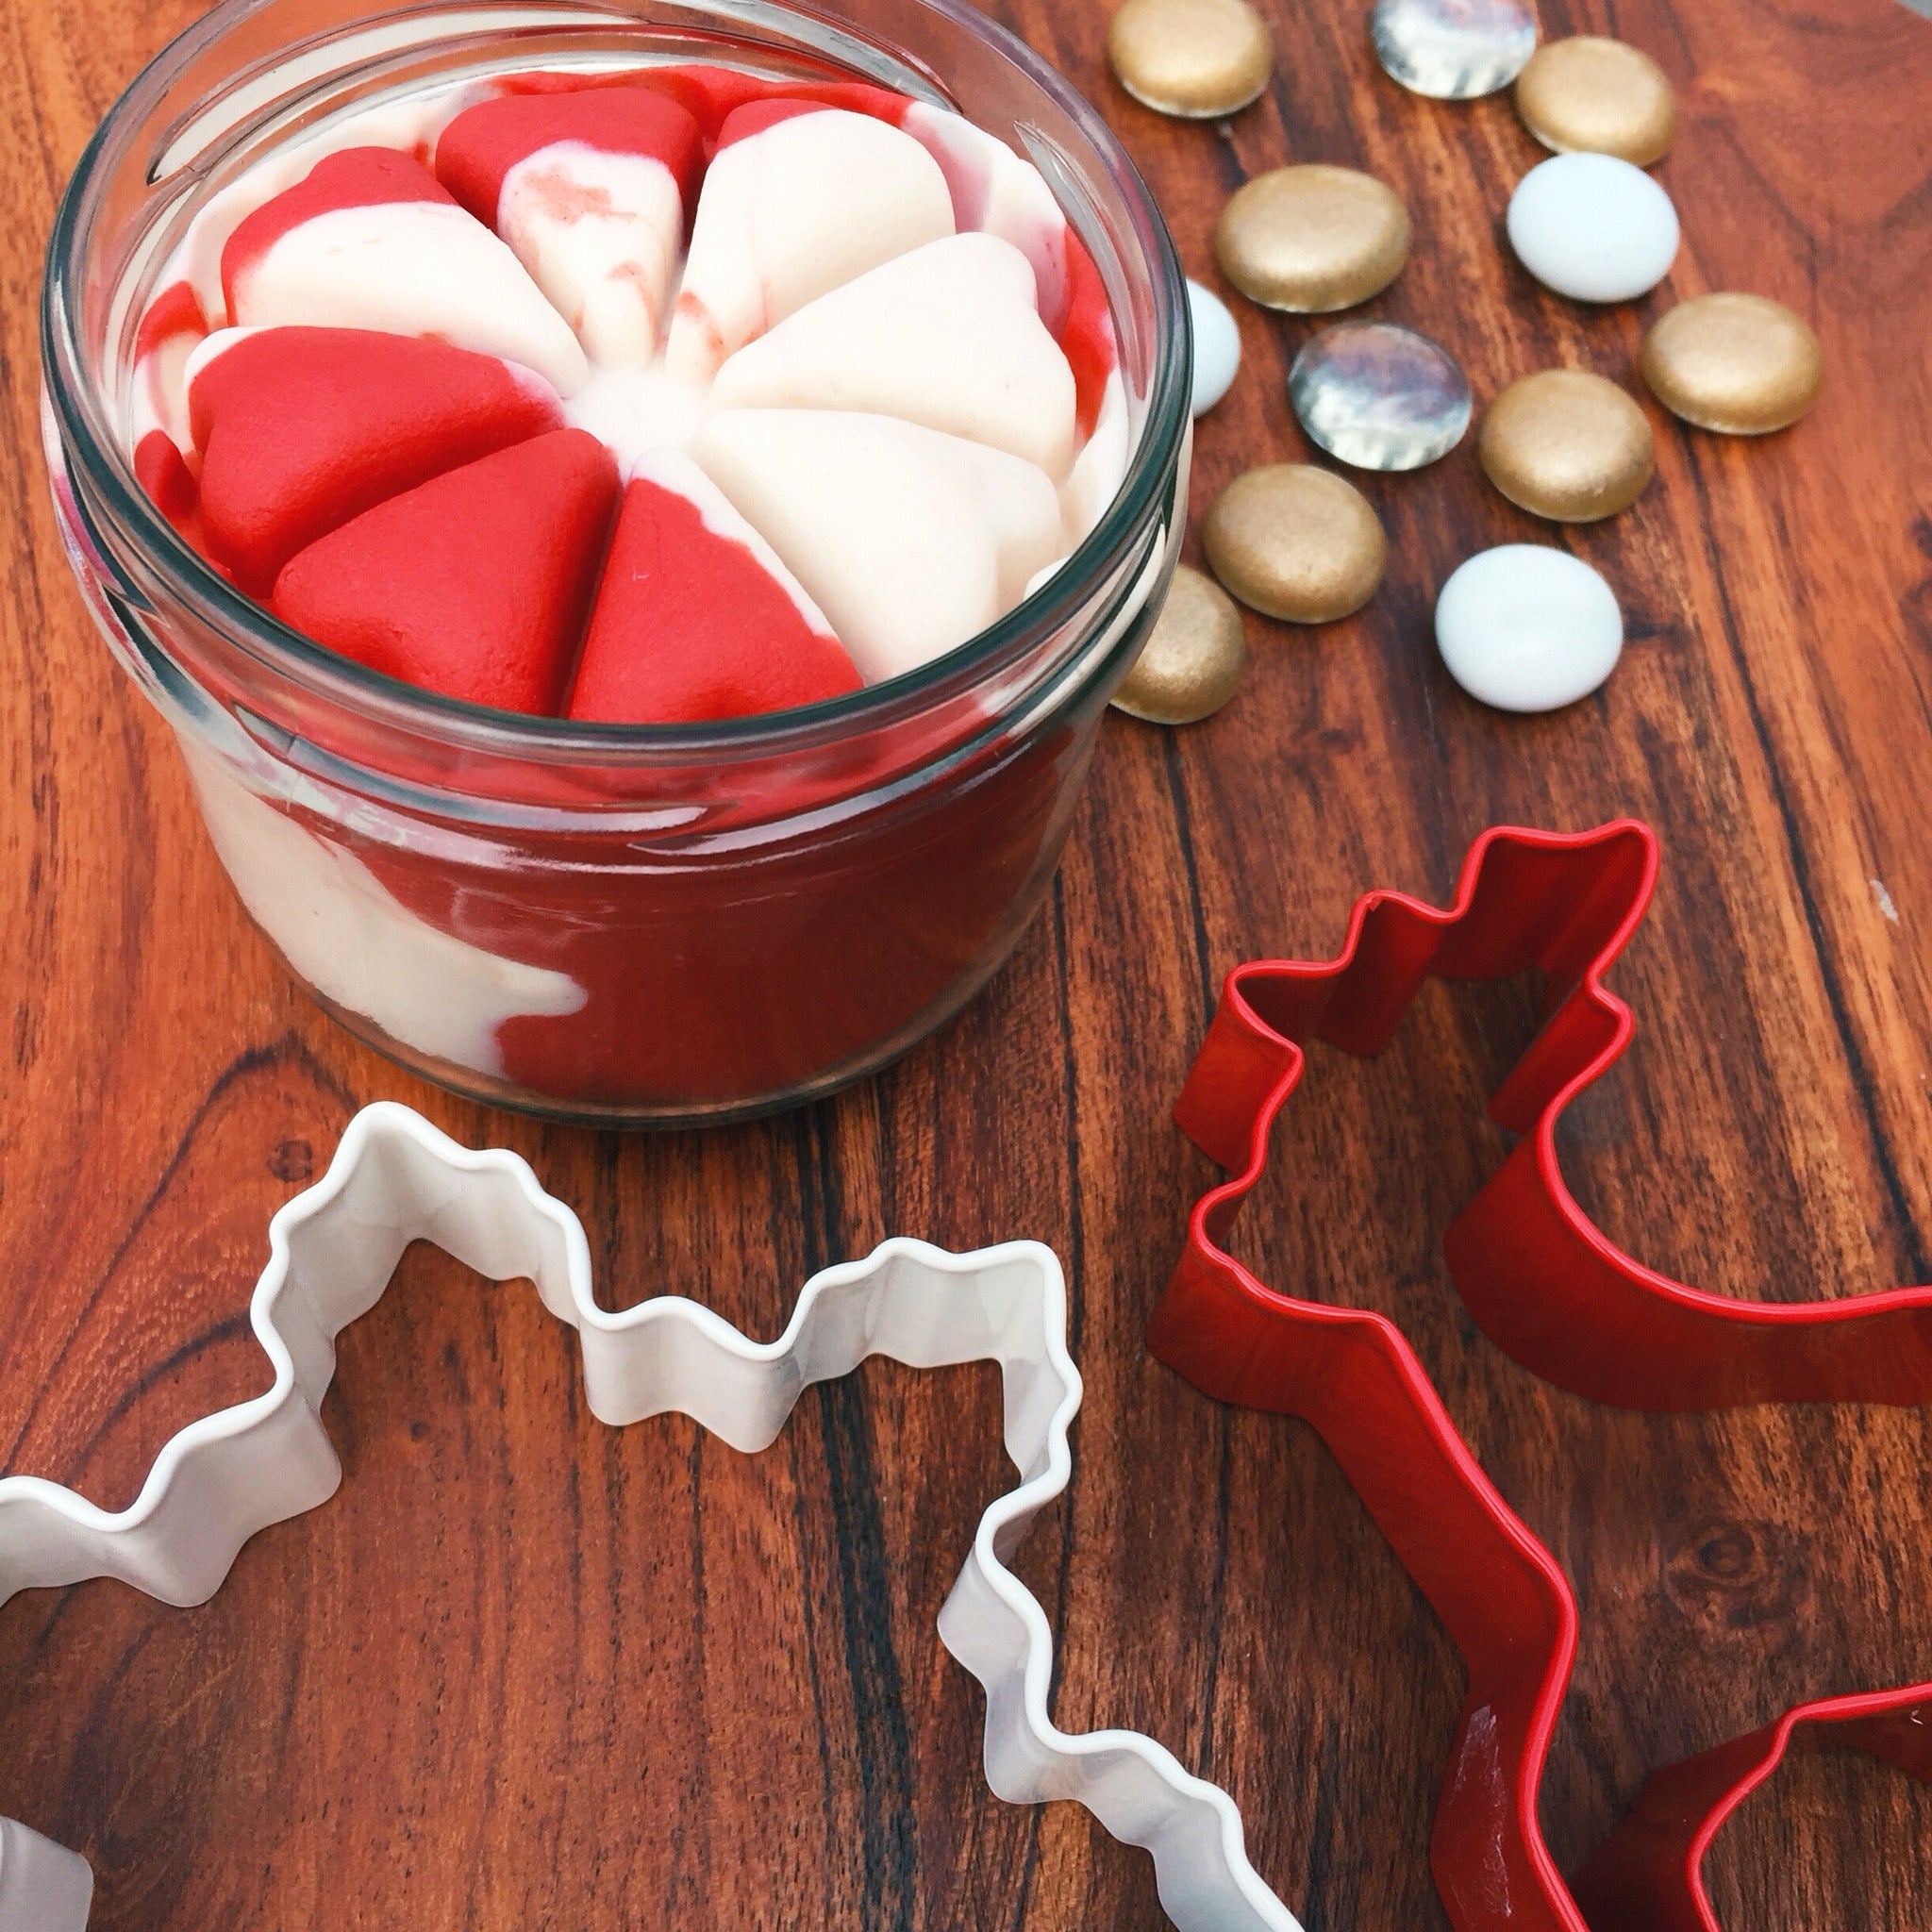 Candy Cane swirled Christmas Play Dough. Hand made in NZ, but now for Christmas! The perfect gift or stocking stuffer!